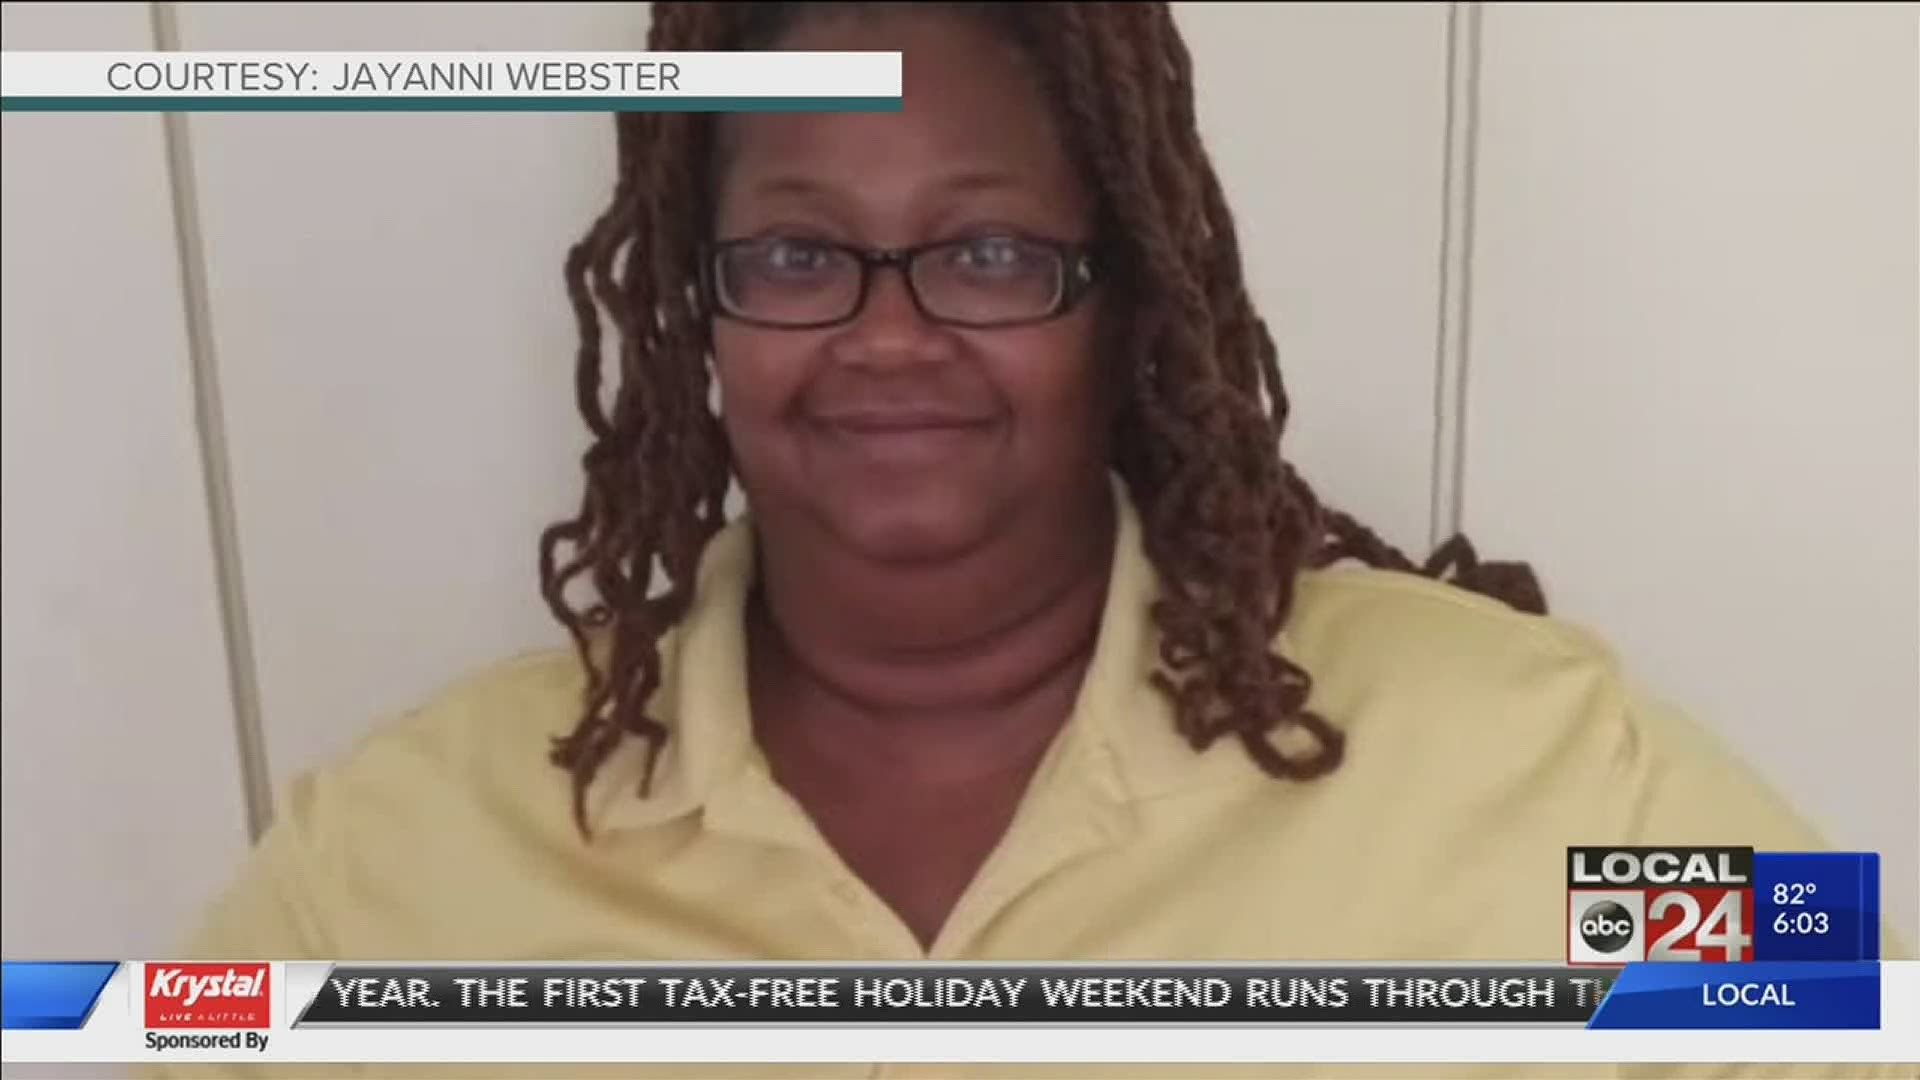 A GoFundMe was set up for Sepia Coleman, well known locally in Fight For 15 movement.